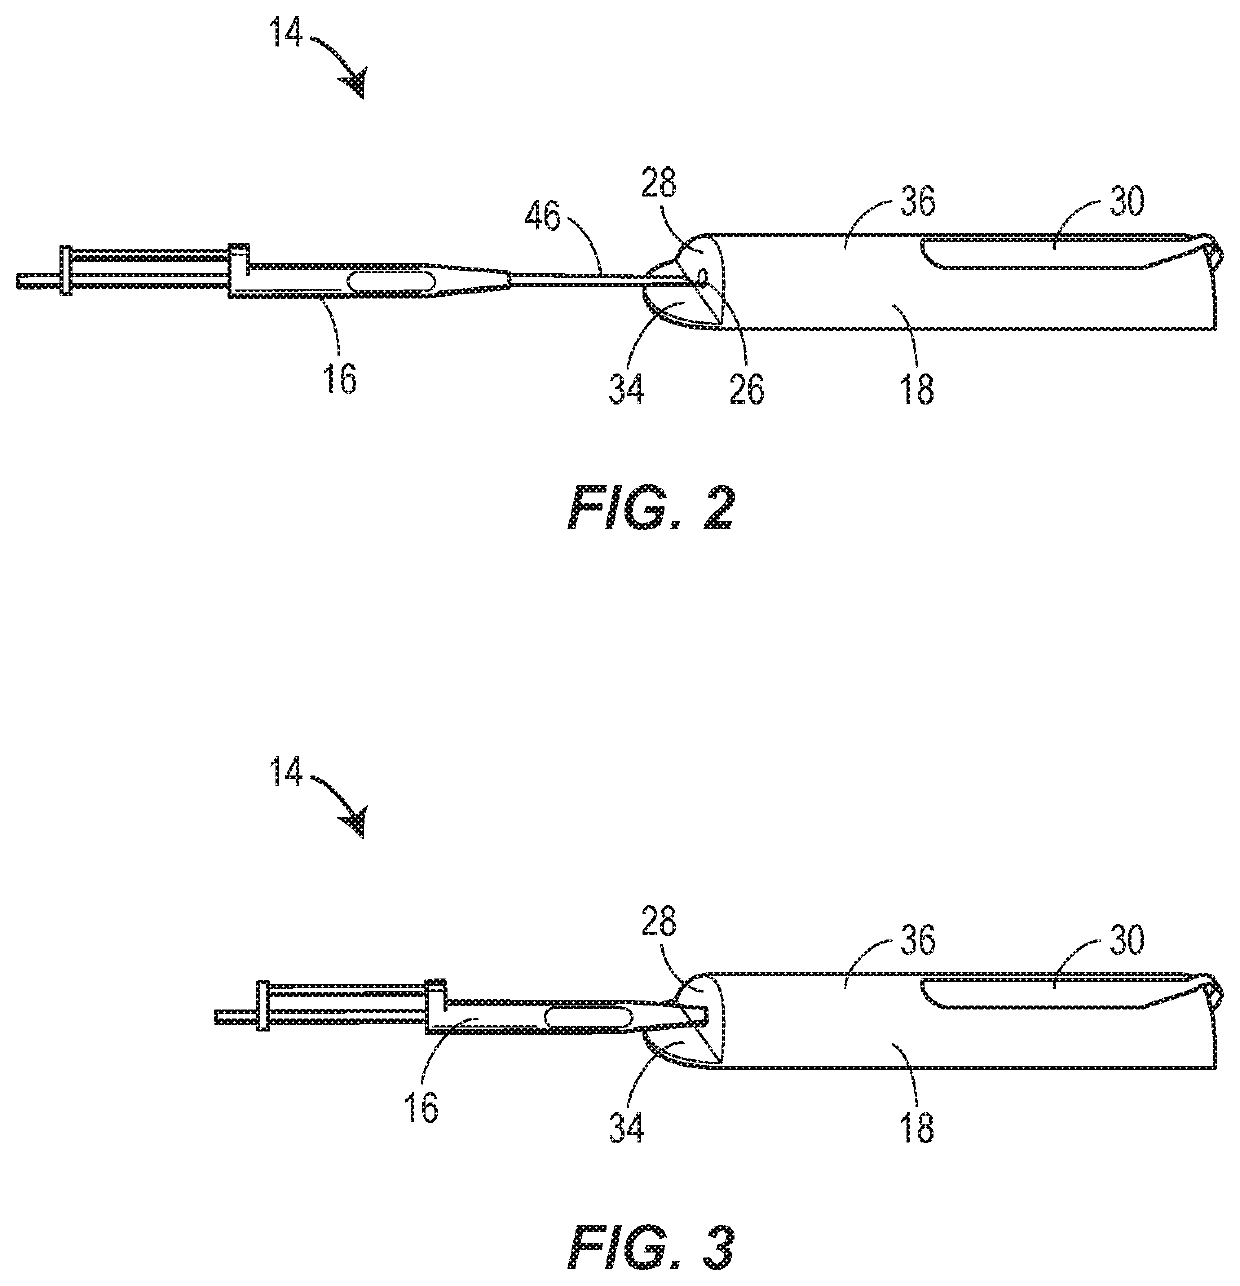 Assistive device for subcutaneous injections or implants